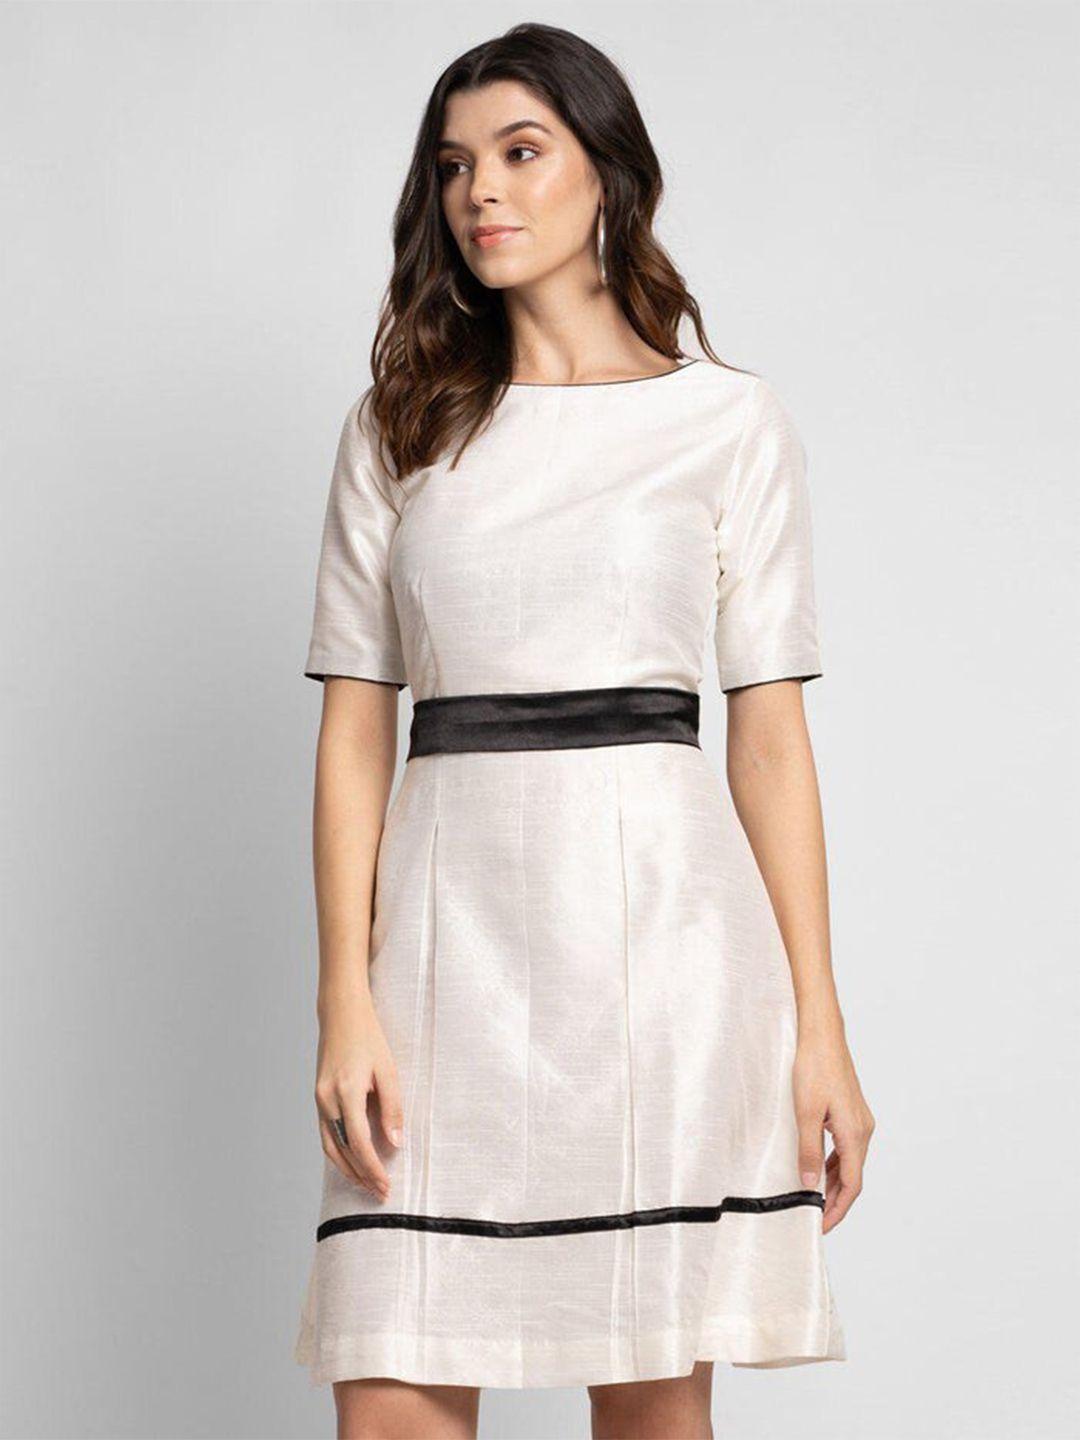 powersutra-boat-neck-belted-fit-&-flare-dress